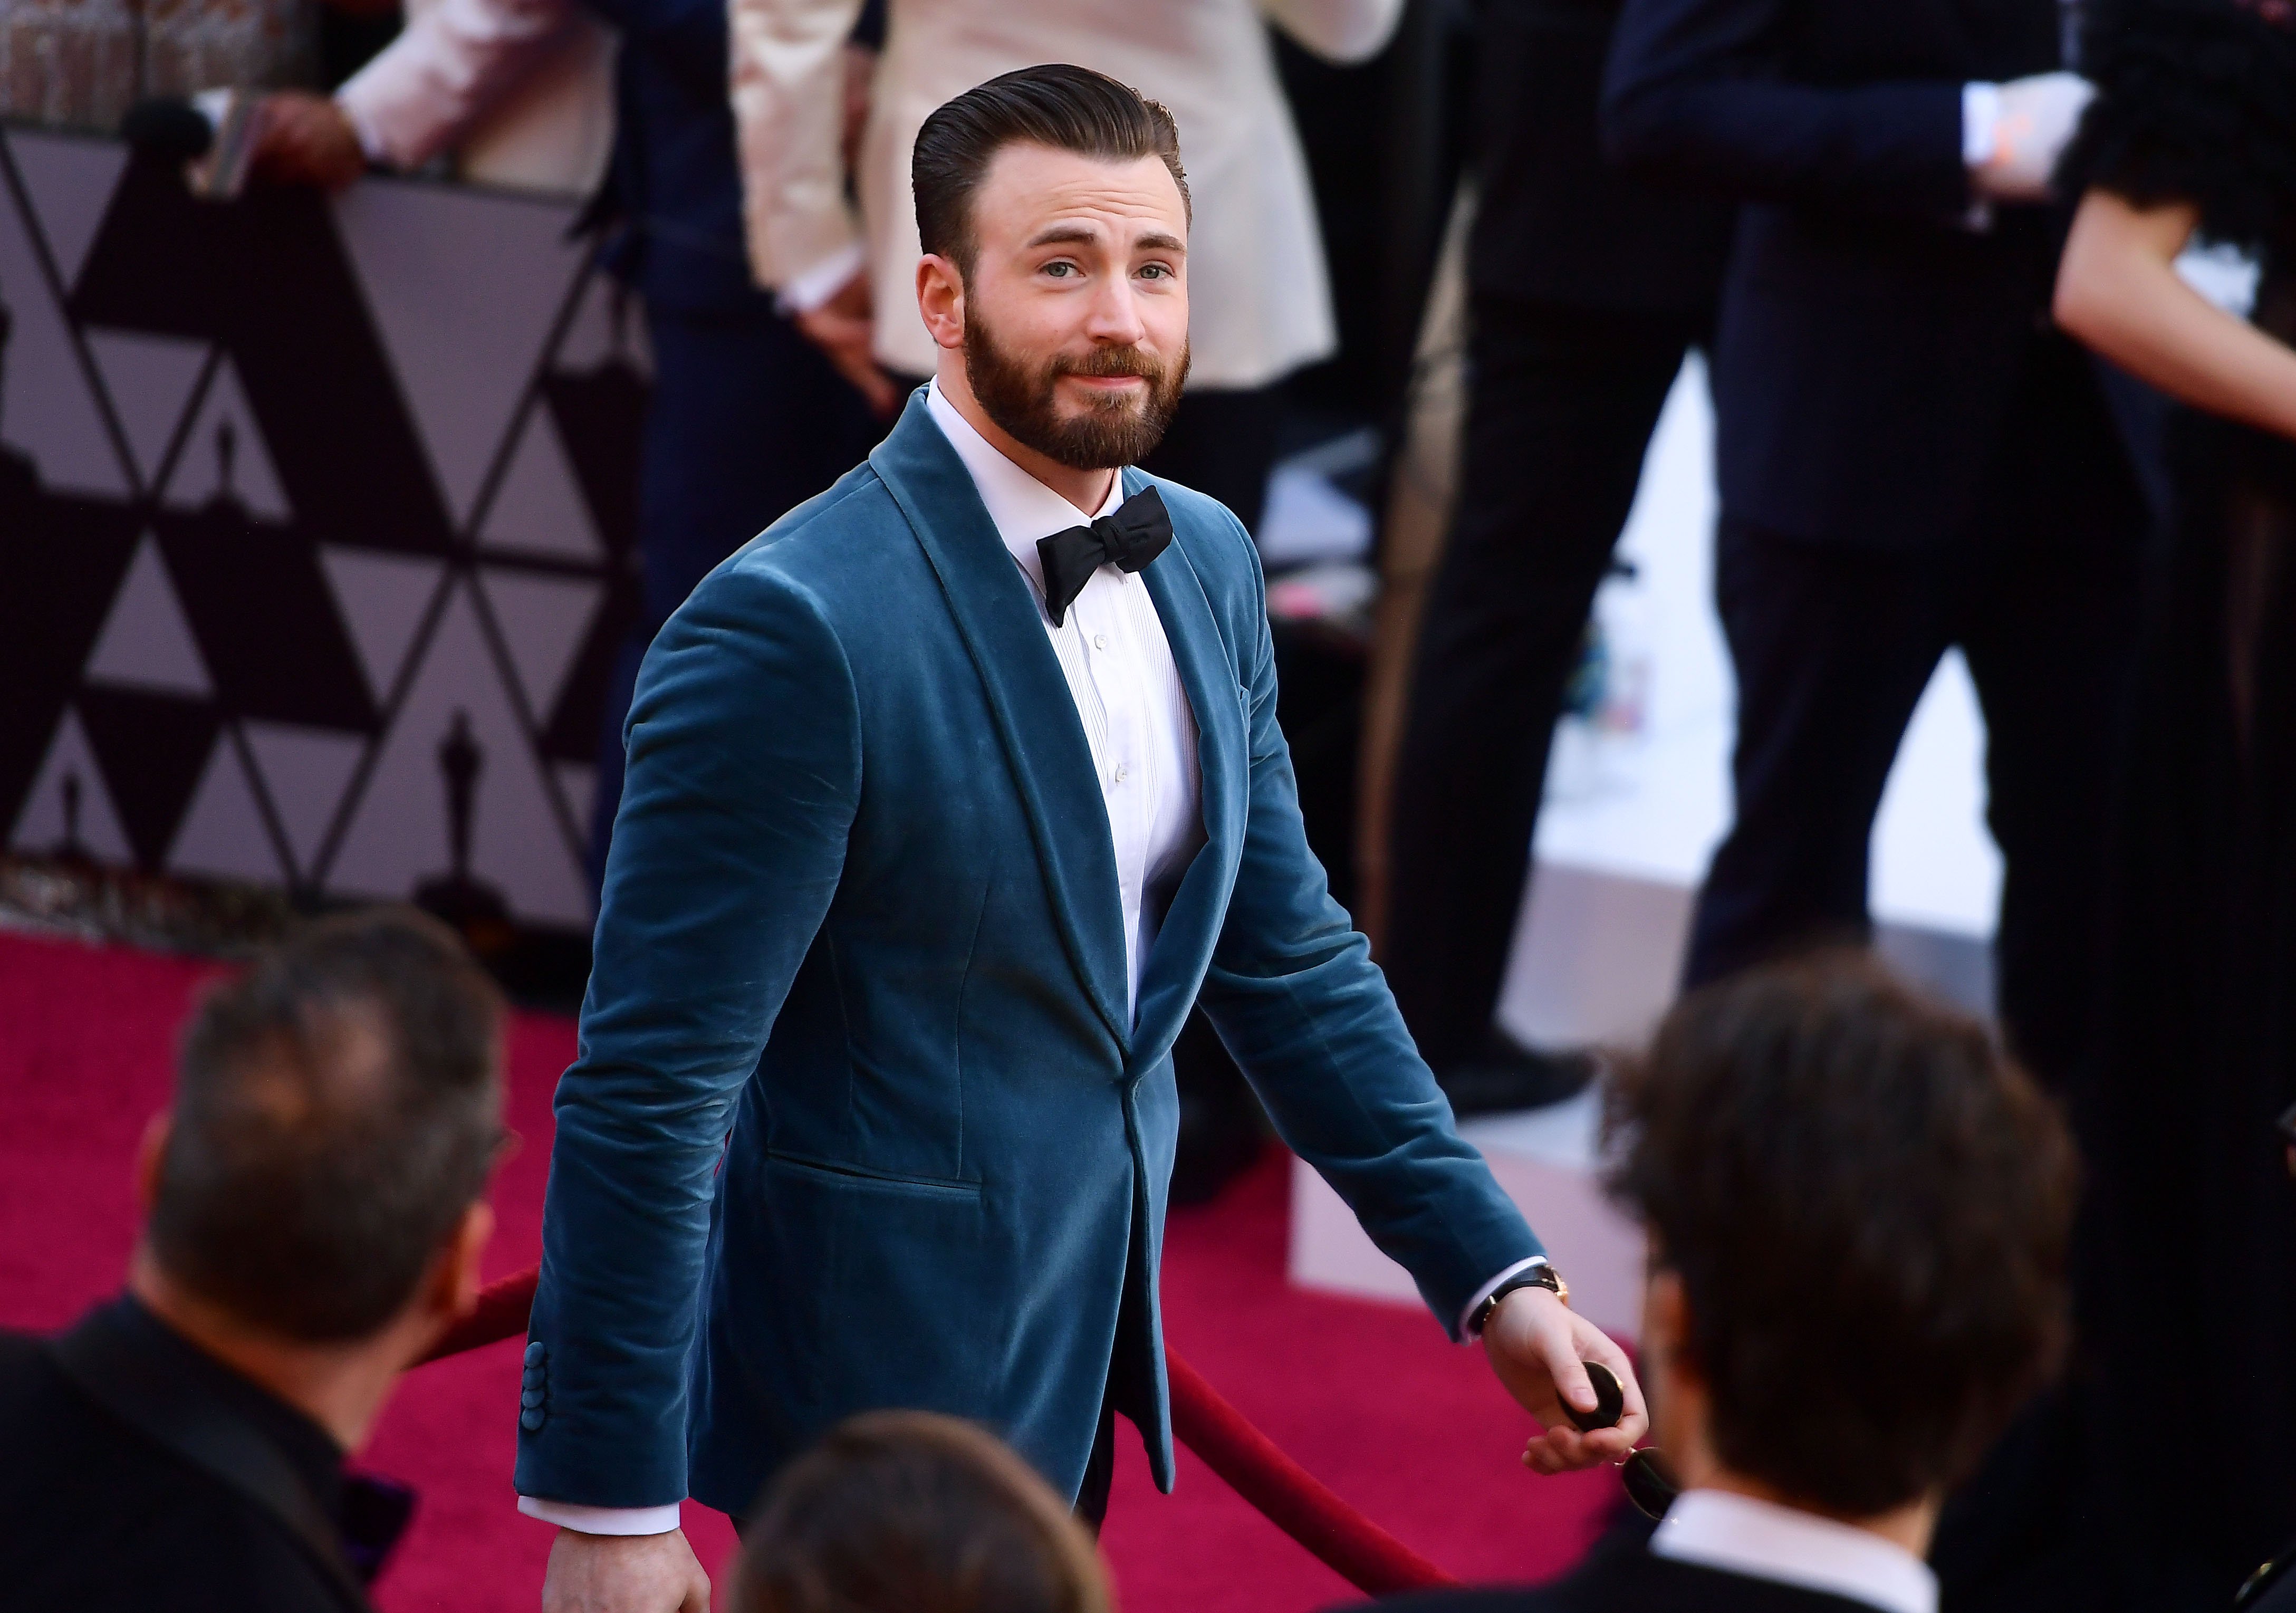  Chris Evans attends the 91st Annual Academy Awards at Hollywood and Highland on February 24, 2019 in Hollywood, California. | Photo: Getty images